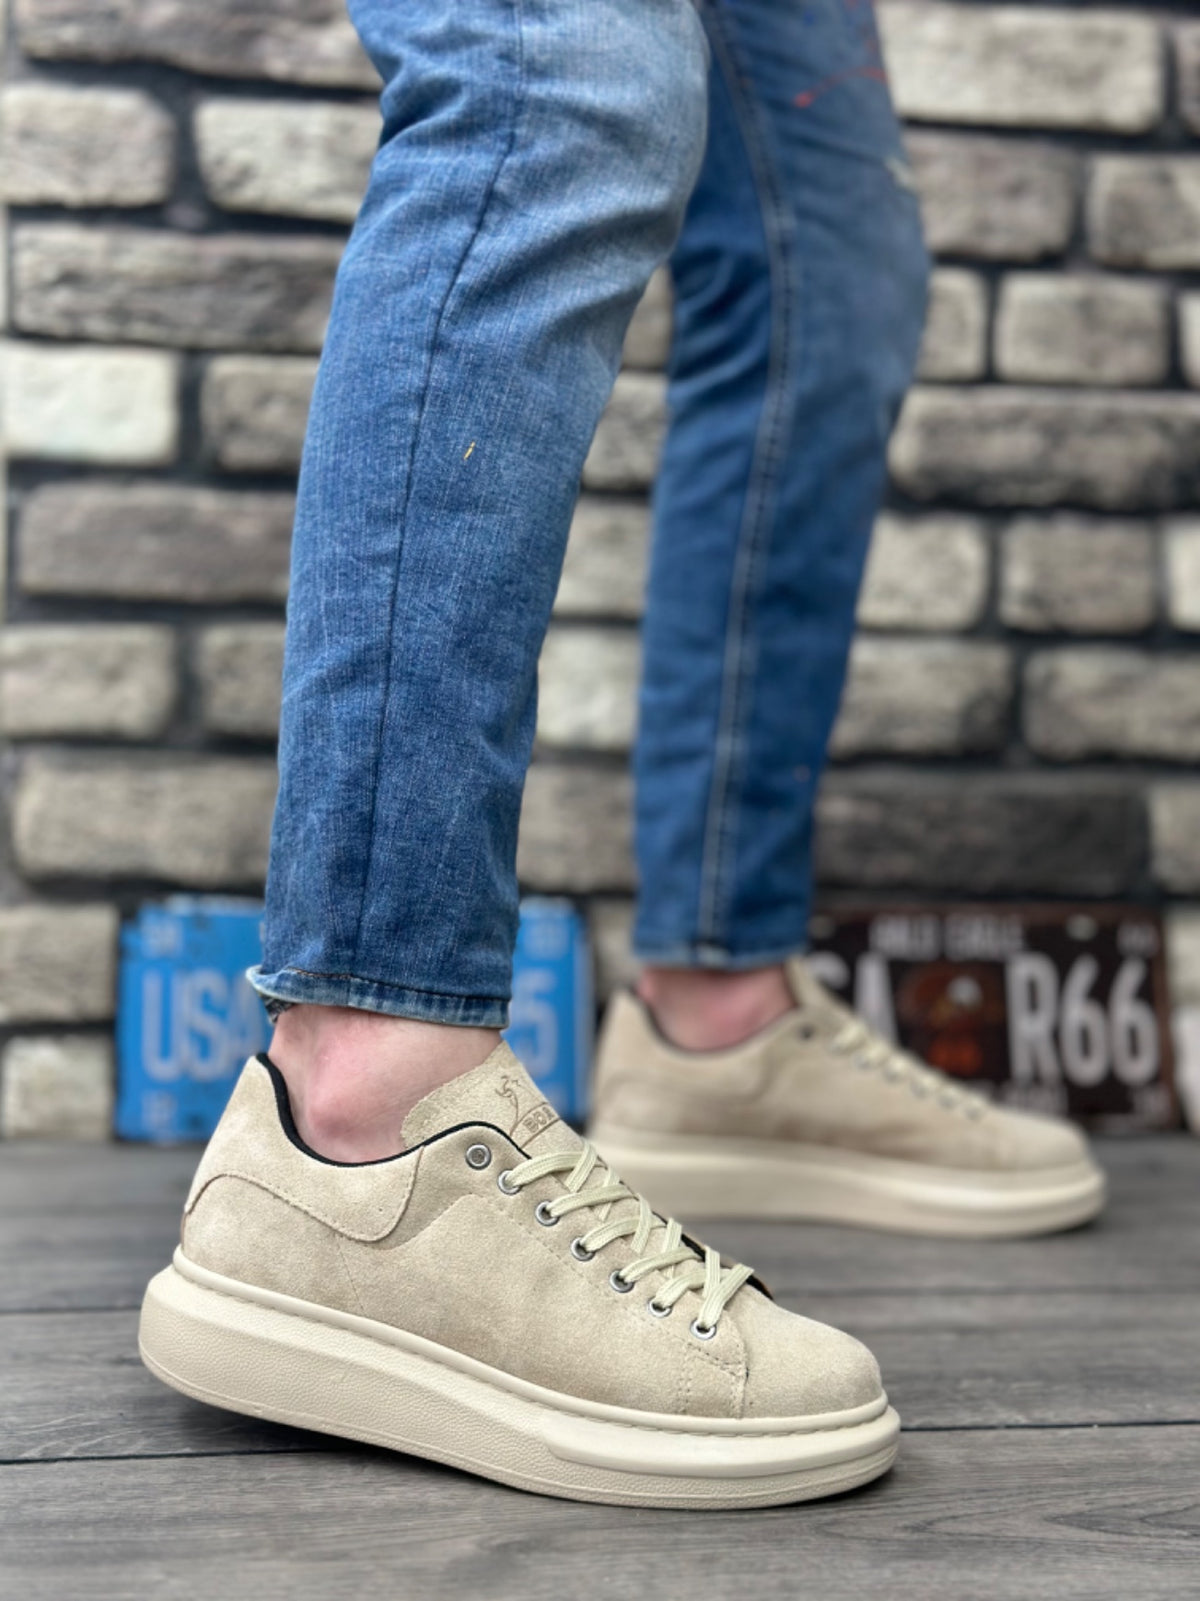 BA0547 Thick High Cream Sole Cream Suede Lace-Up Sports Men's Shoes - STREETMODE ™